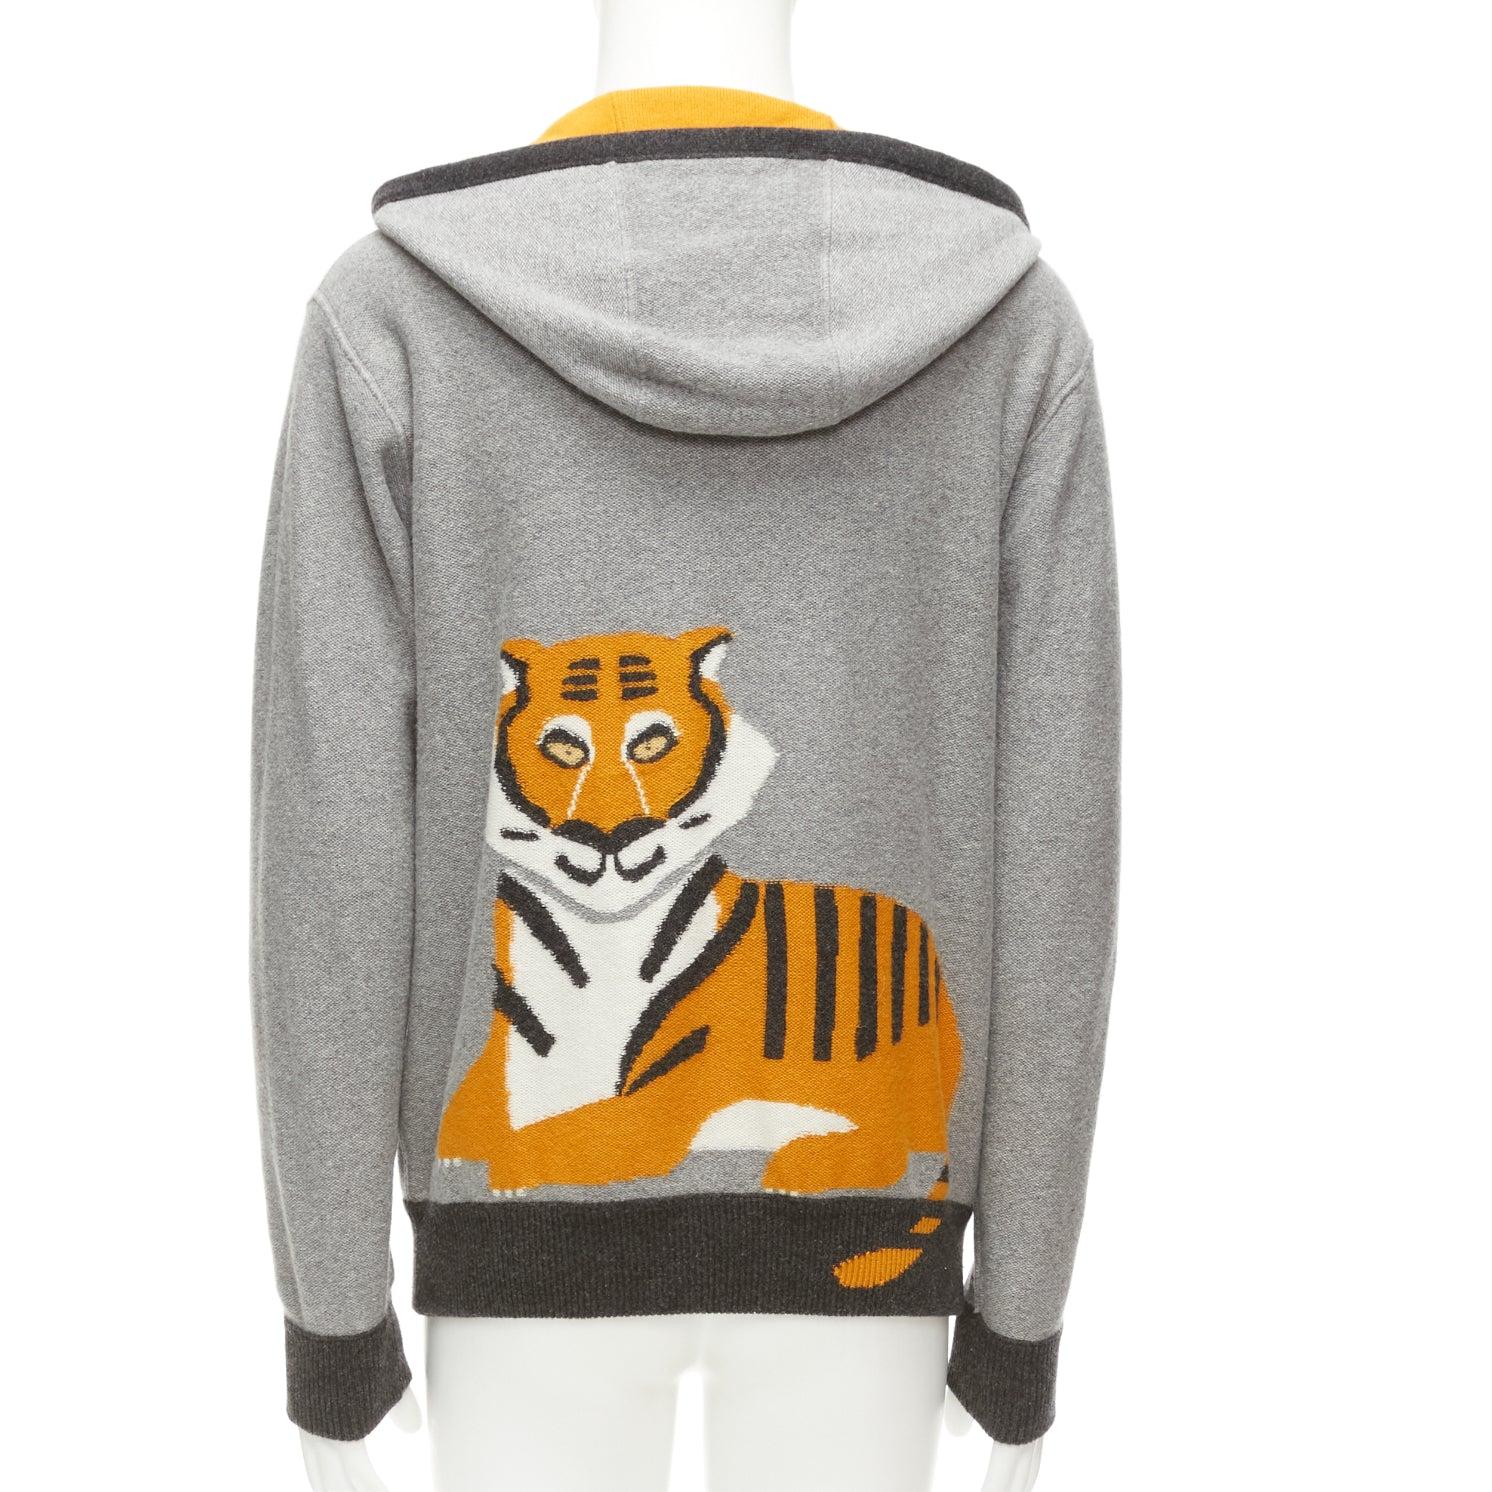 LORO PIANA 100% baby cashmere grey tiger print reversible hoodie zip up M
Reference: YIKK/A00028
Brand: Loro Piana
Material: Cashmere
Color: Grey, Yellow
Pattern: Animal Print
Closure: Zip
Lining: Grey Cashmere
Extra Details: Reversible with one